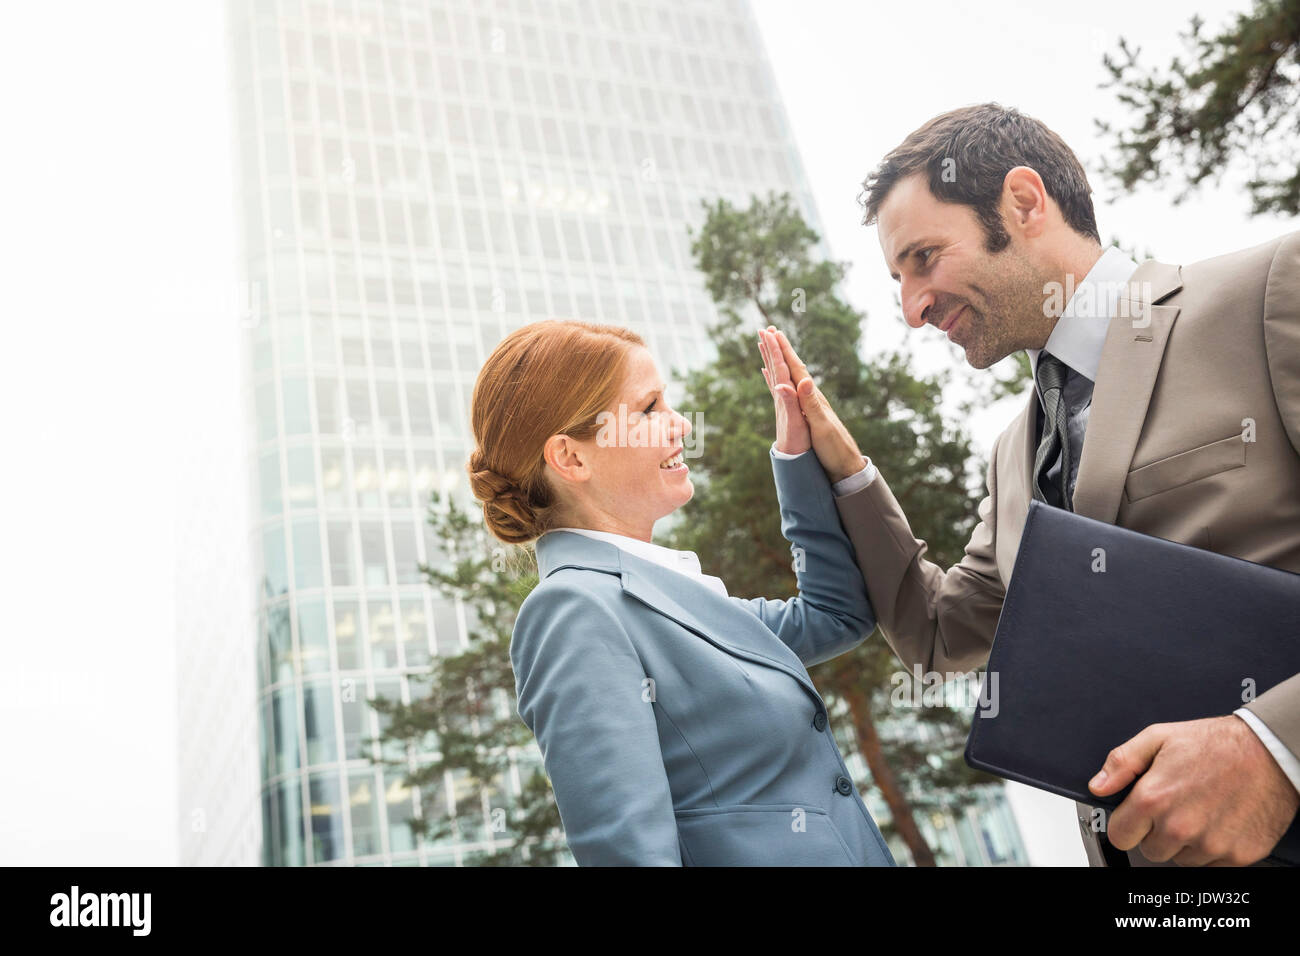 Business people high fiving outdoors Stock Photo